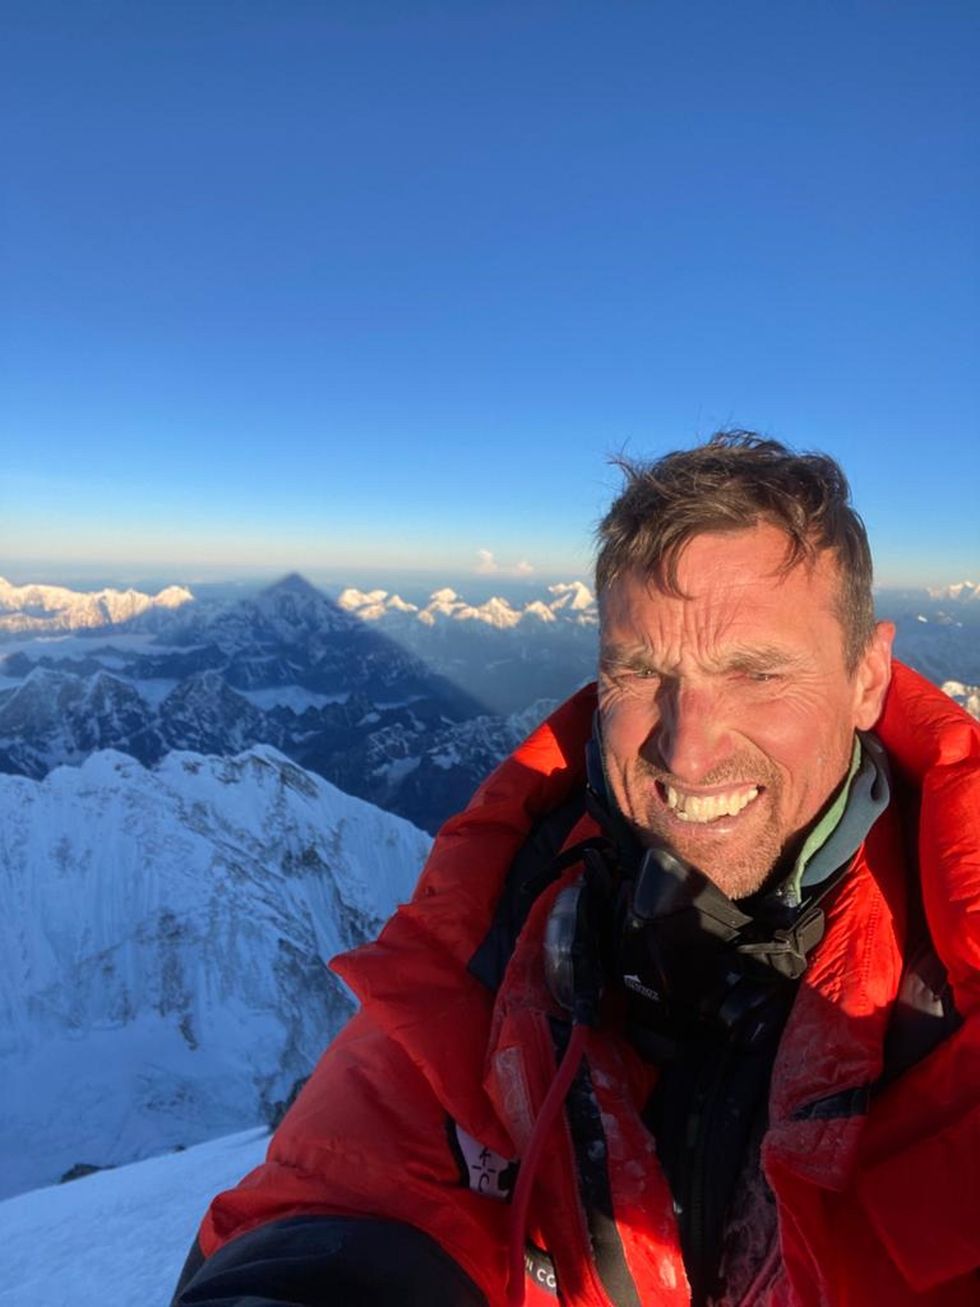 British climber hails ‘one of the best days’ on Everest after record climb